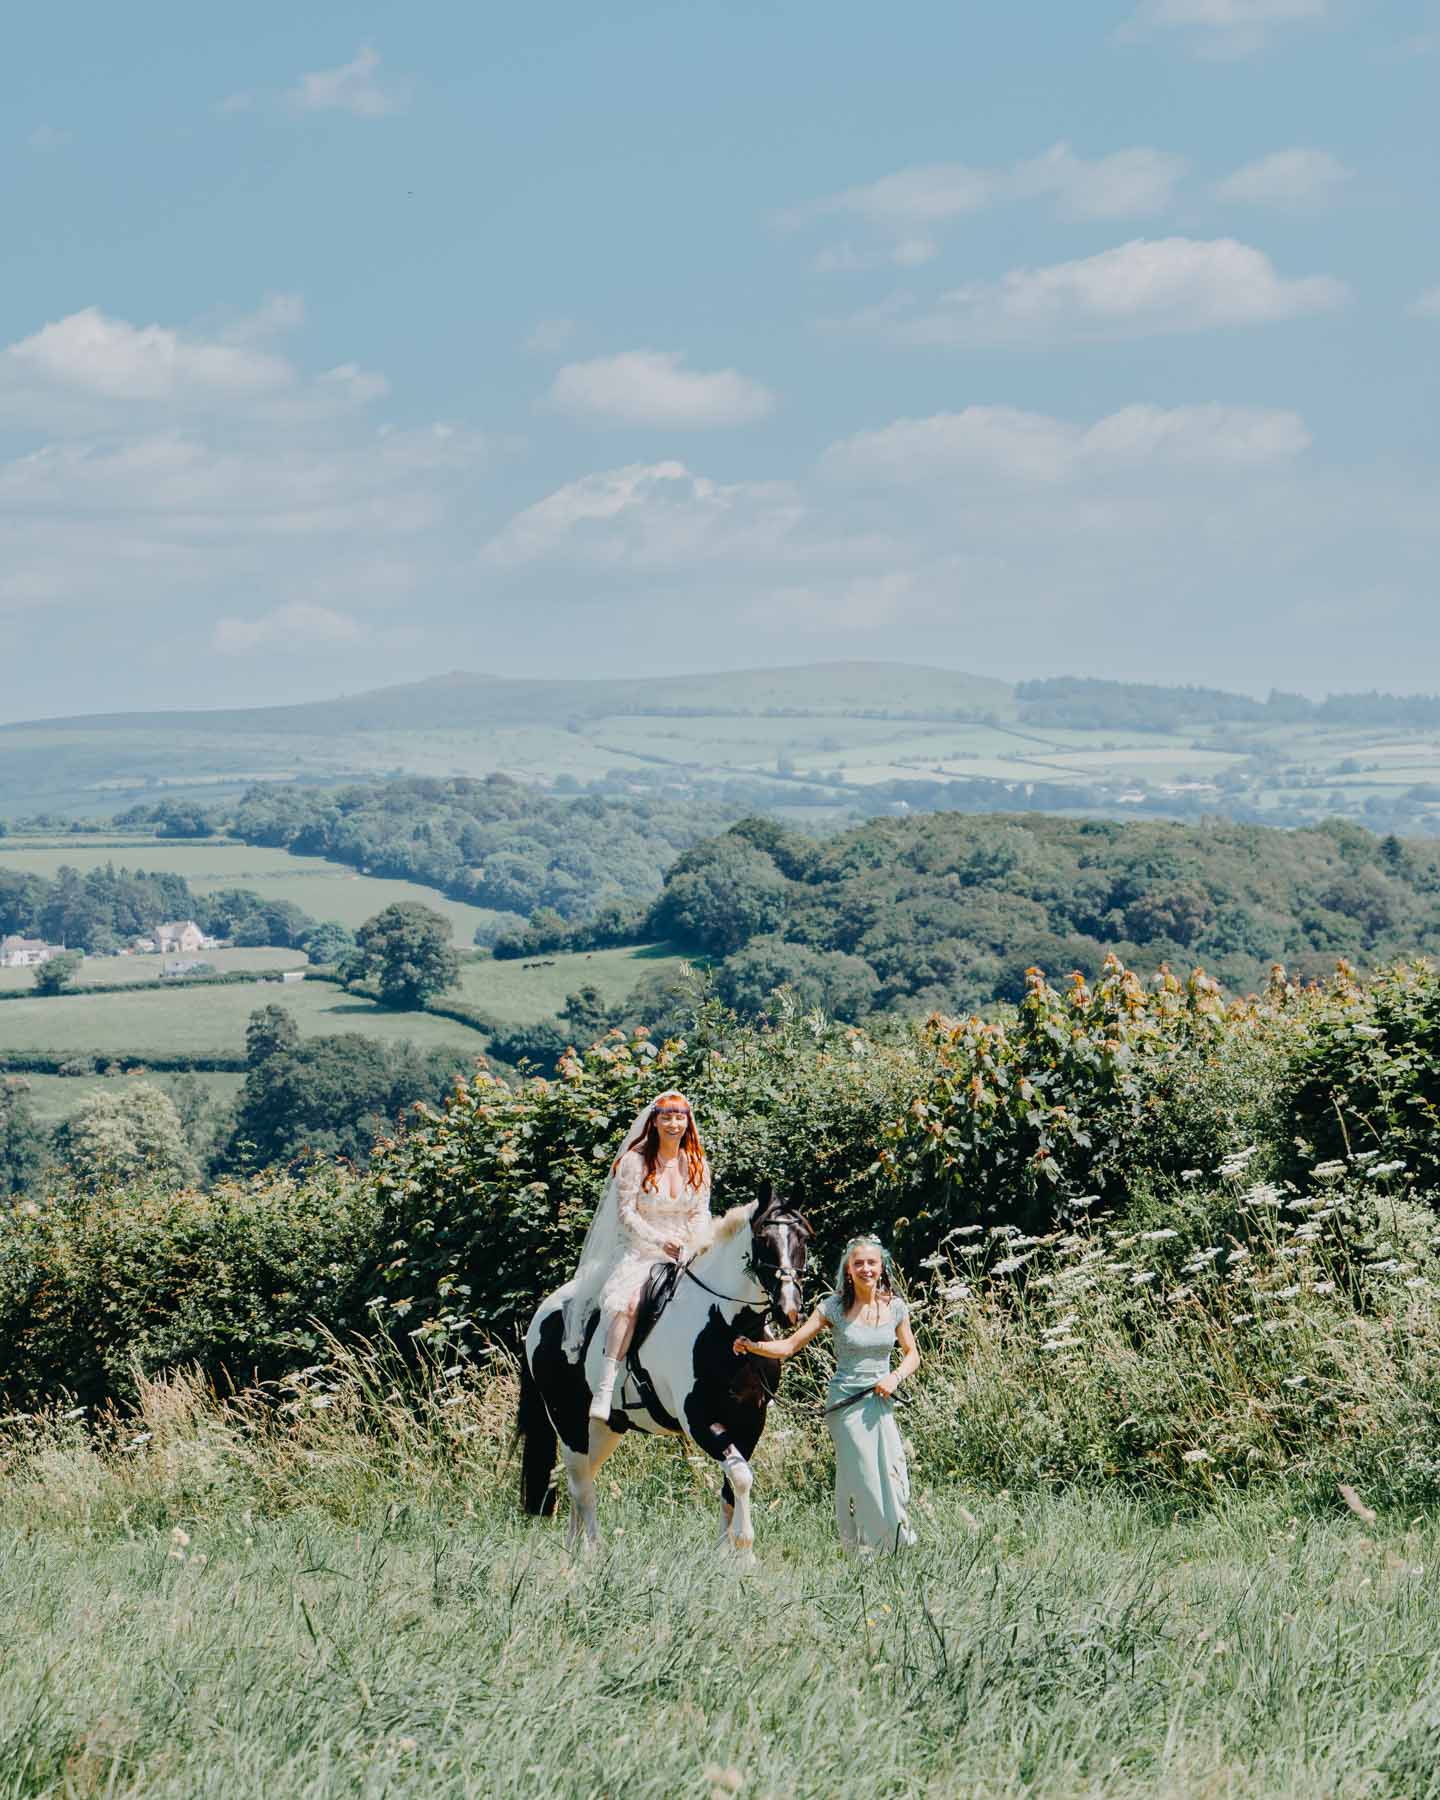 the bride is riding a horse to the handfasting ceremony - Handfasting ceremony photography